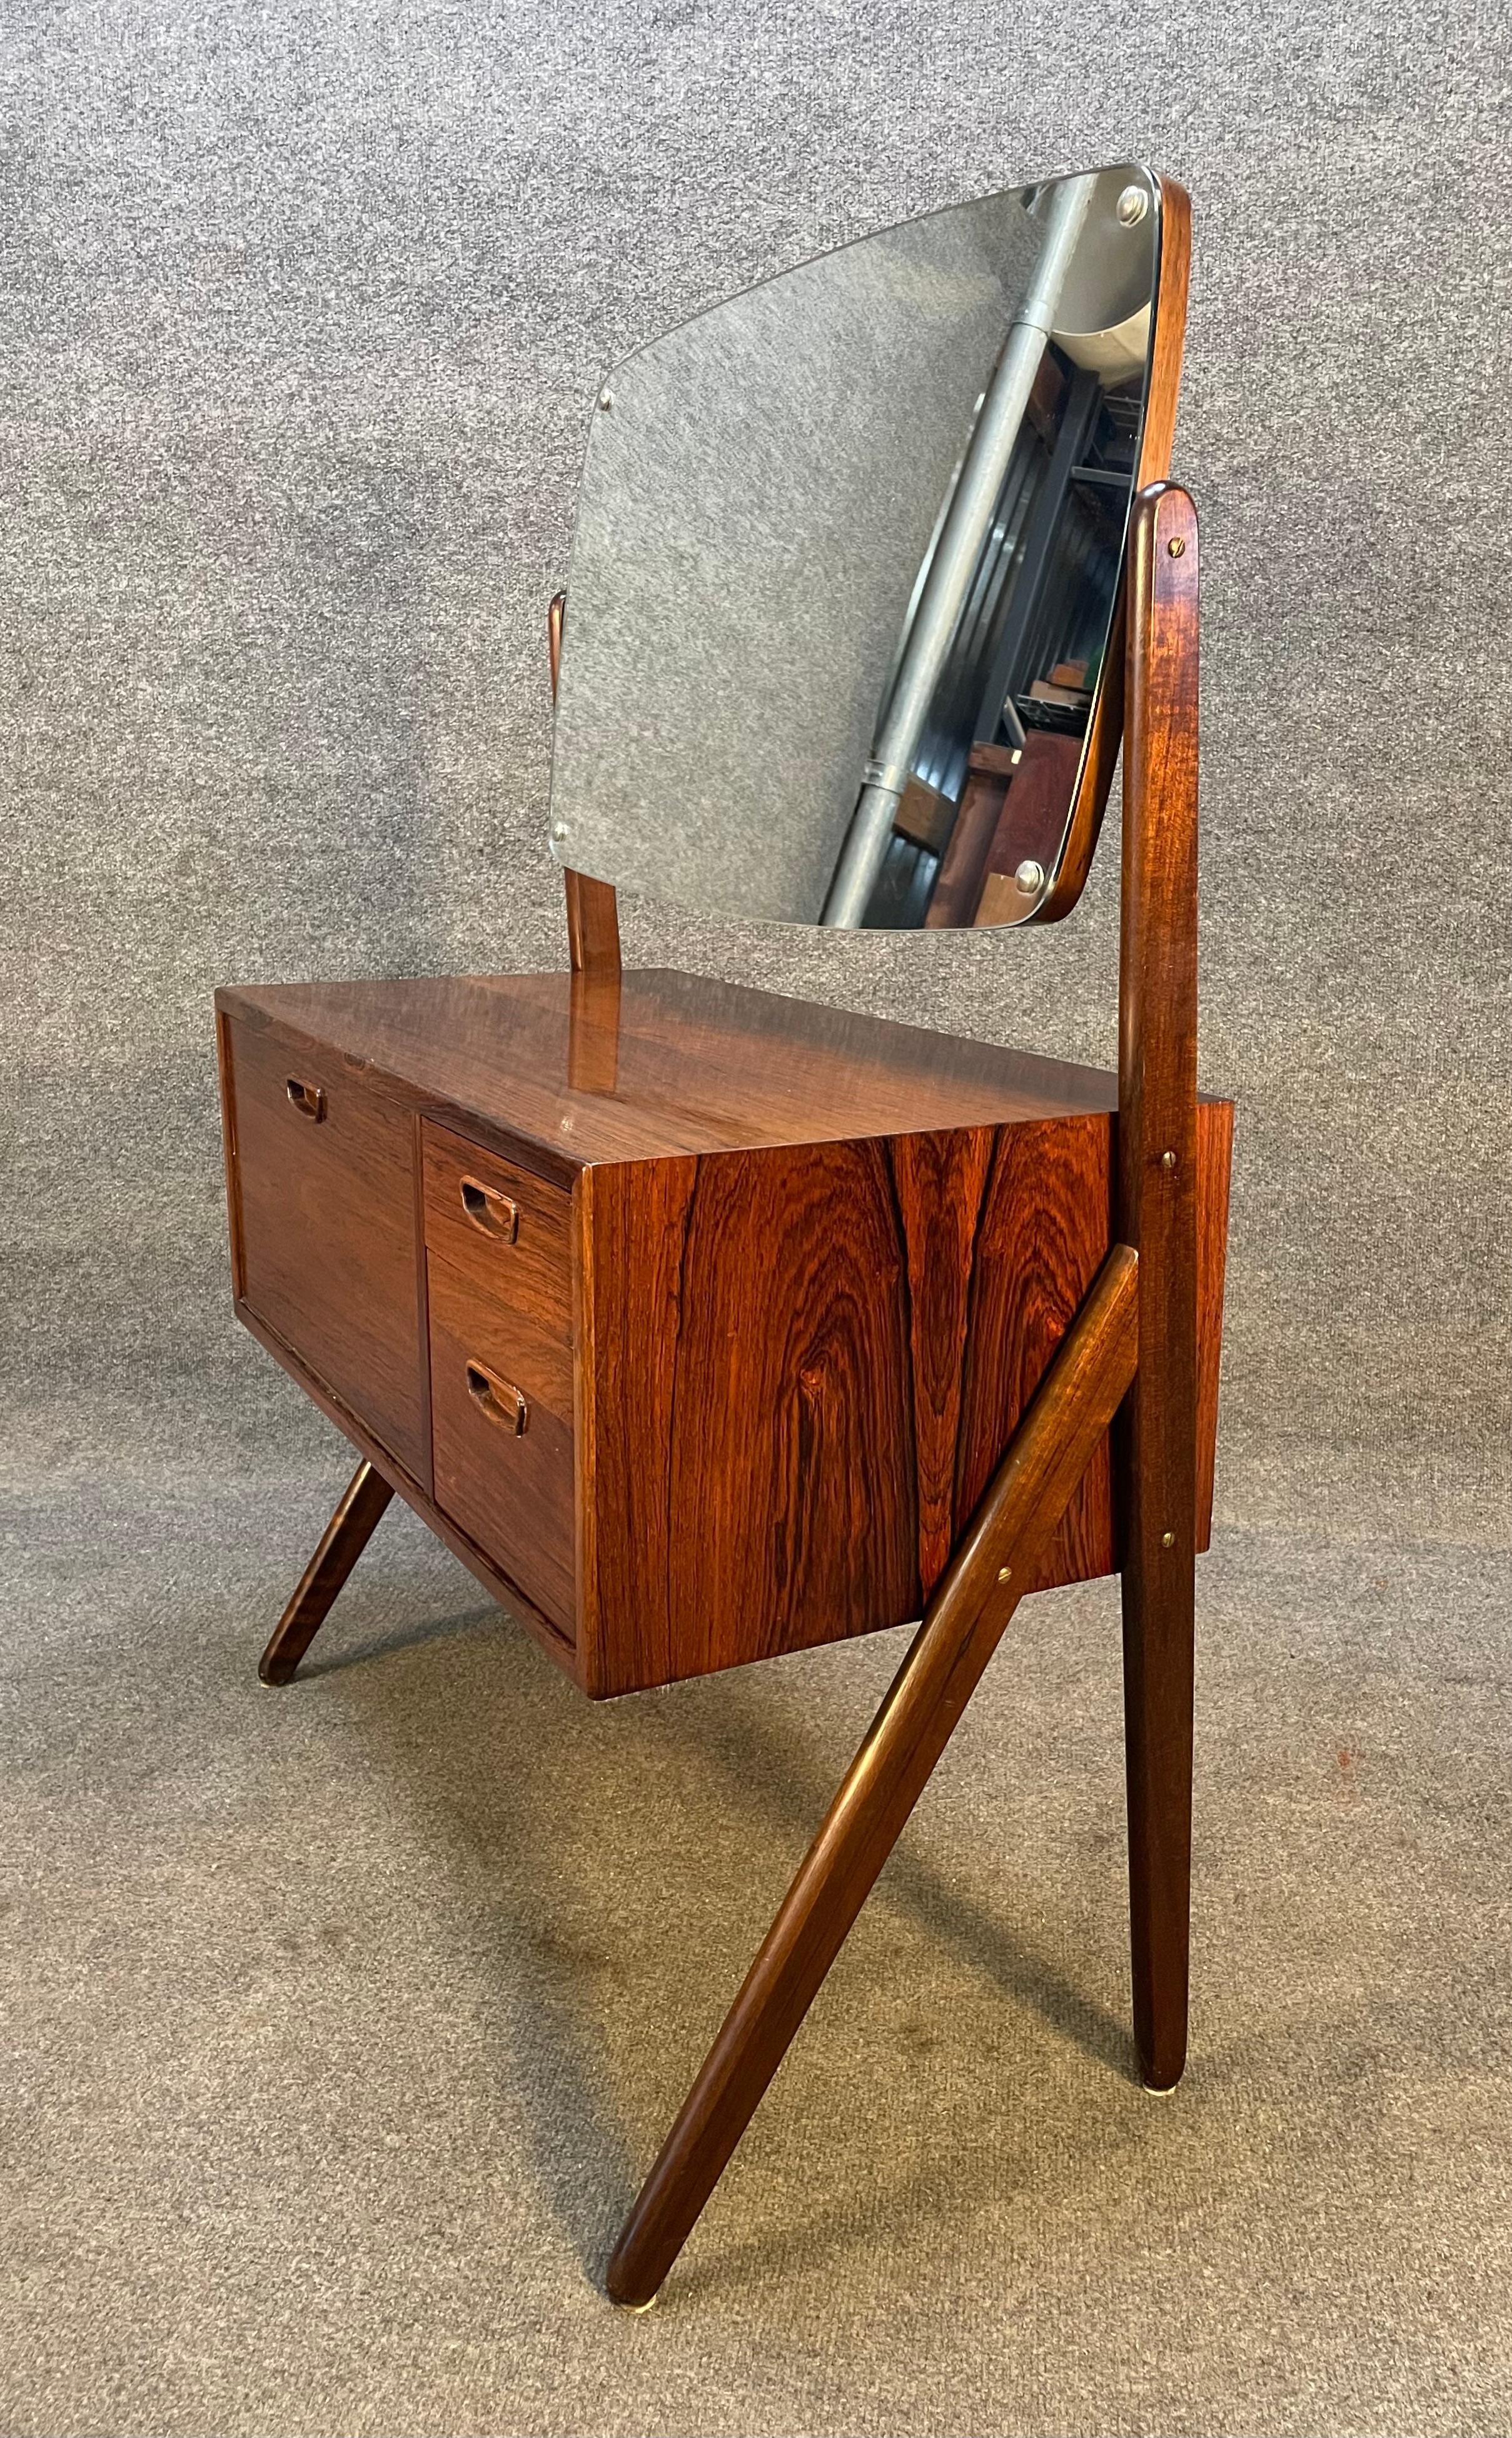 Here is a stunning dressing table/vanity in rosewood designed by Sigfred Omann in the 1960's and manufactured in Denmark. Beautiful rosewood grain through.
This exquisite piece features a tilting mirror in excellent condition, a set of 